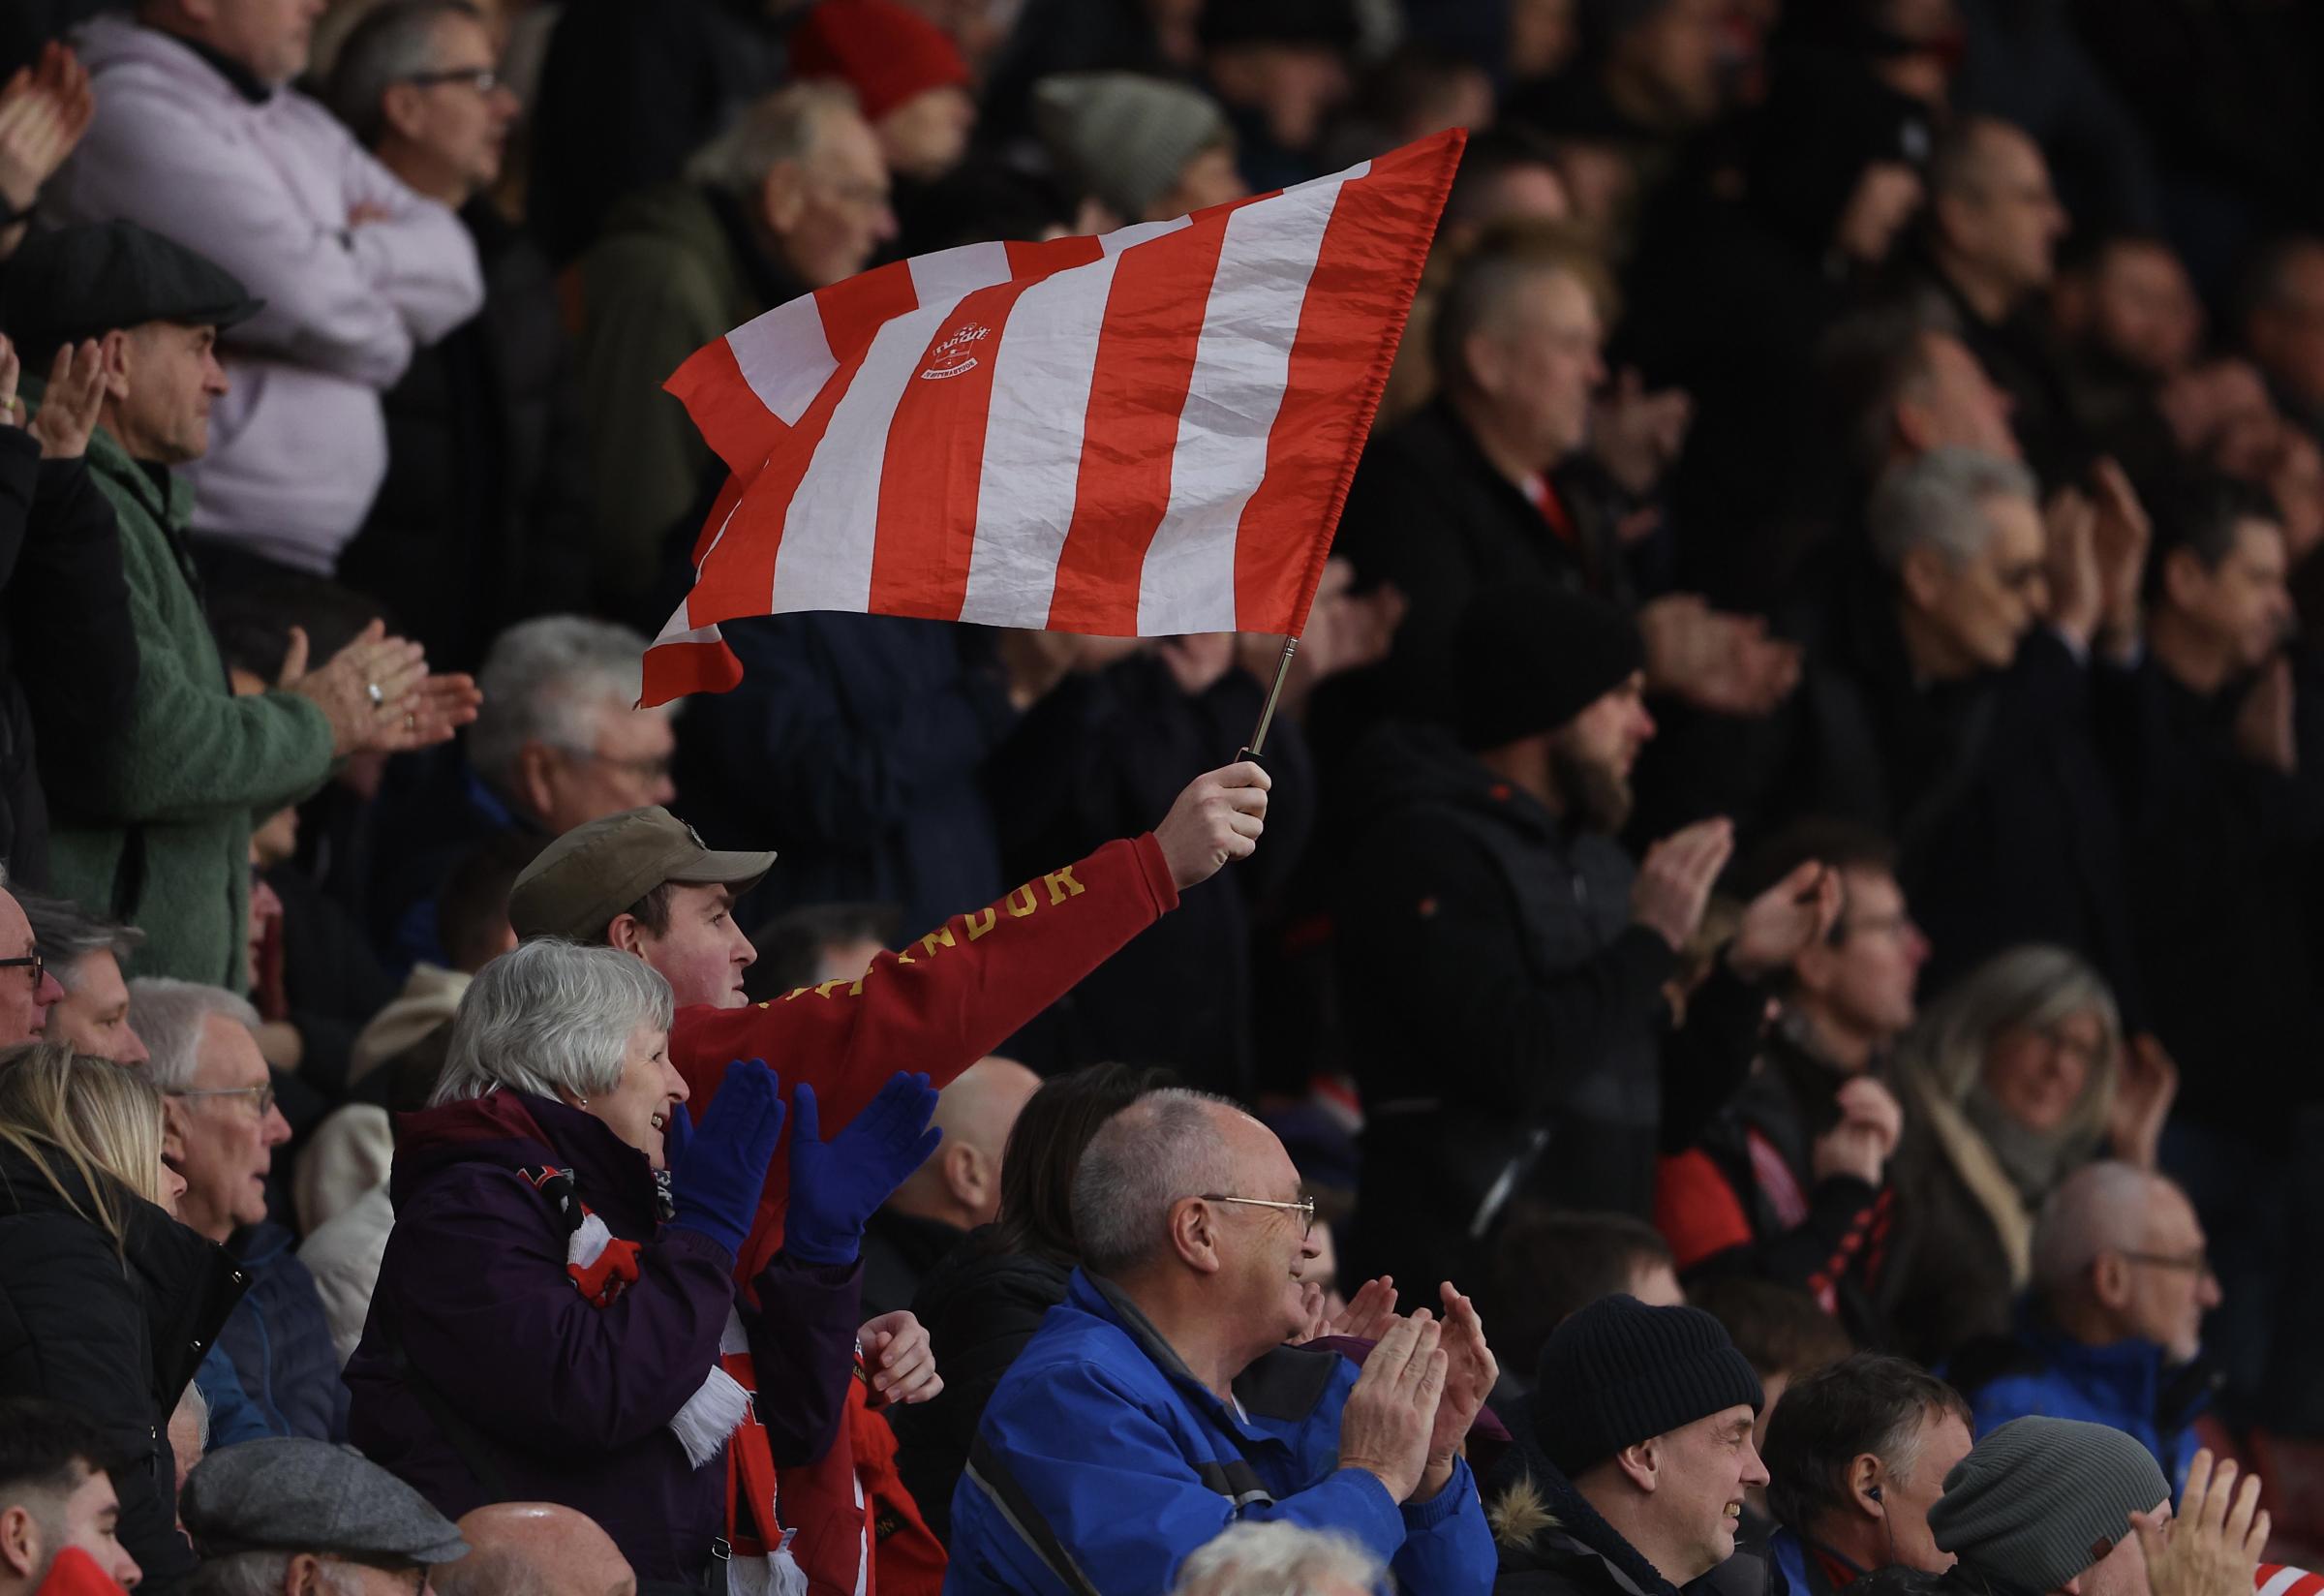 Southampton encourage fans to create atmosphere ahead of West Brom tie